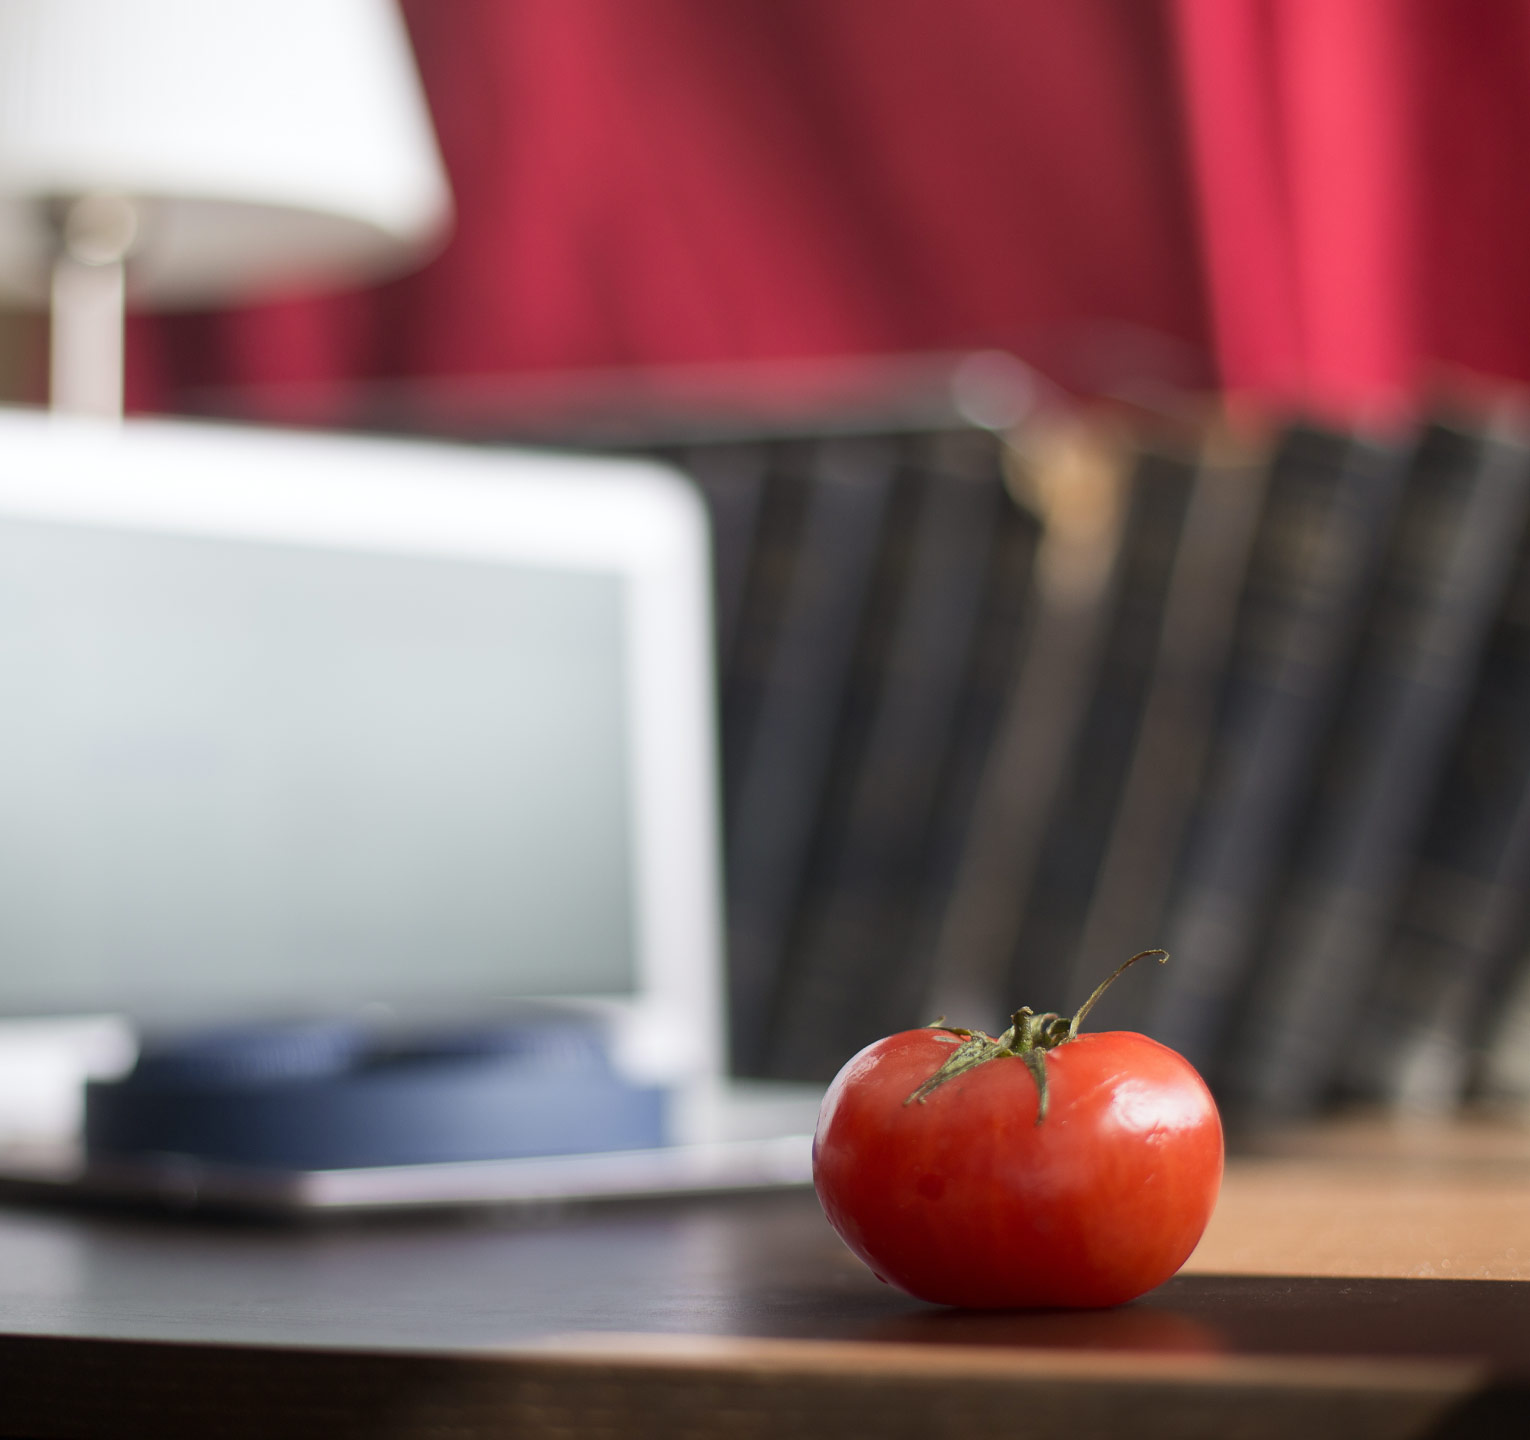 The Pomodoro Technique for boosting learning productivity